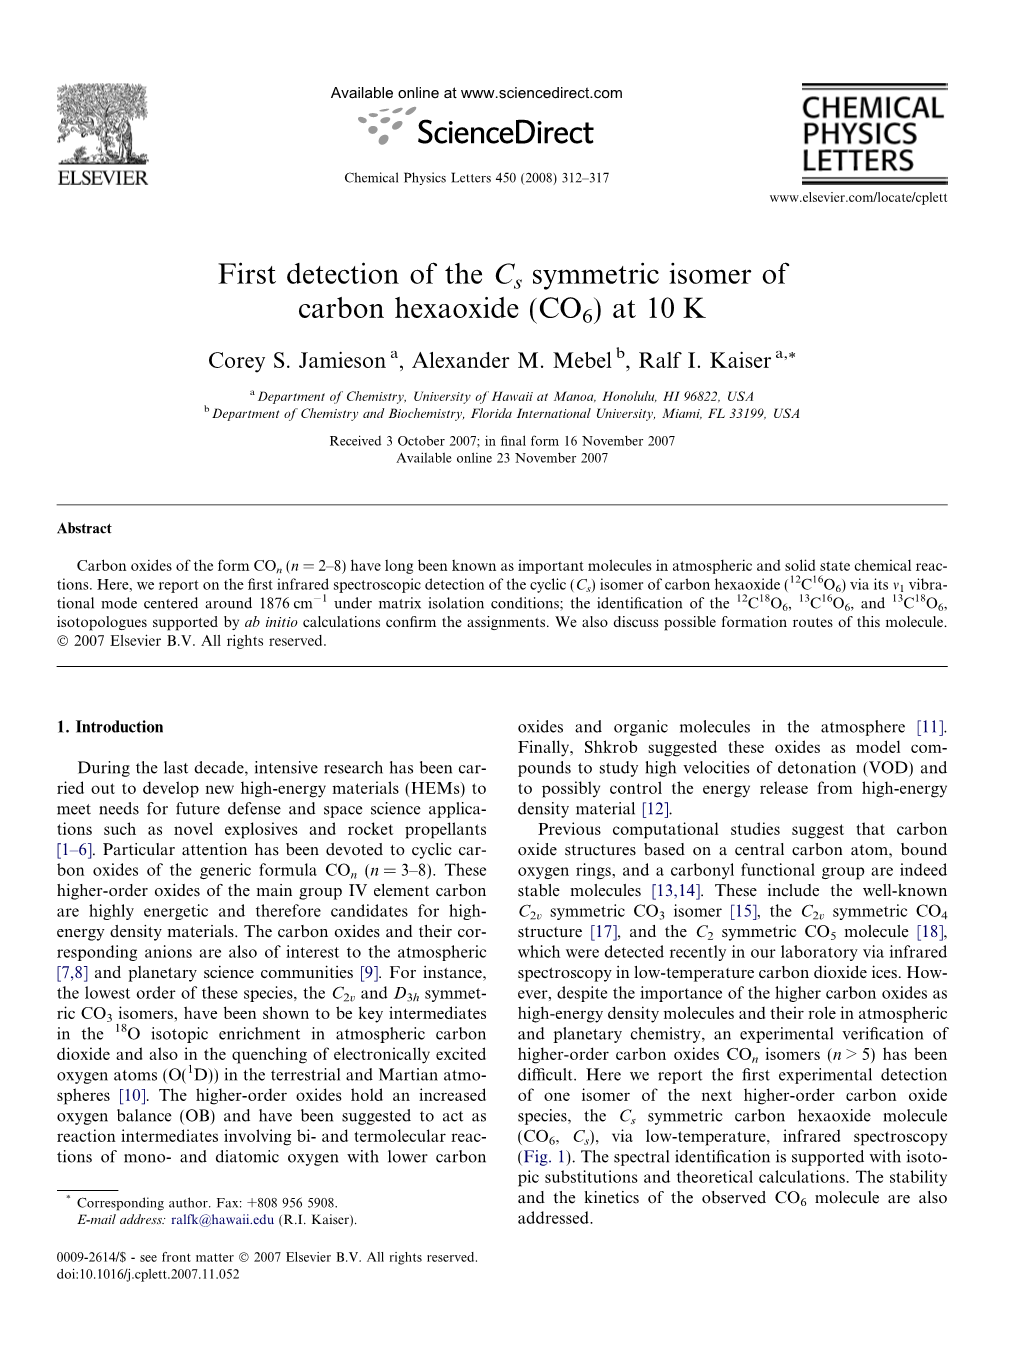 First Detection of the Cs Symmetric Isomer of Carbon Hexaoxide (CO6)At10k